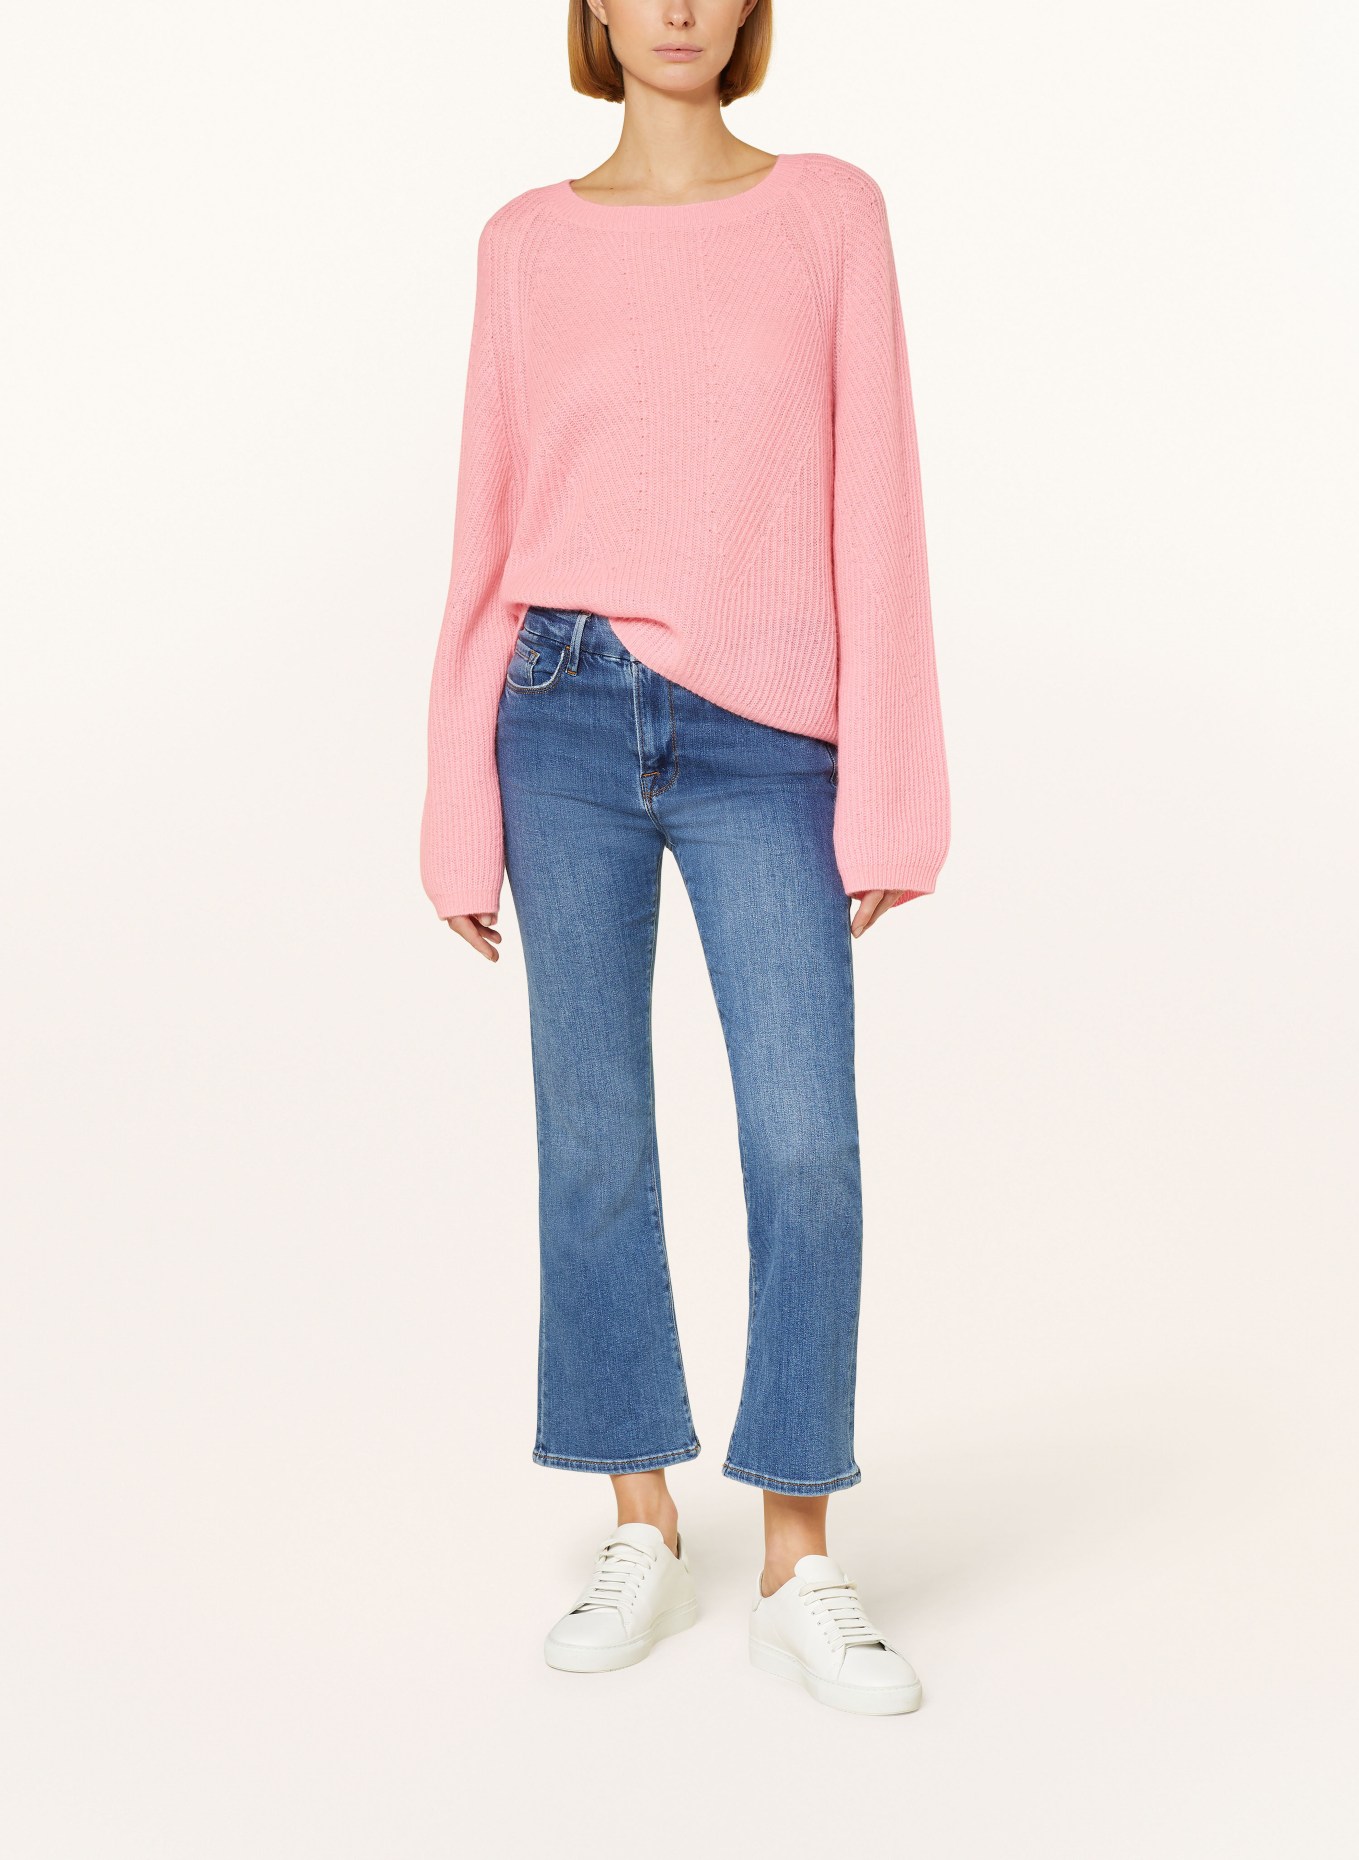 (THE MERCER) N.Y. Cashmere sweater, Color: PINK (Image 2)